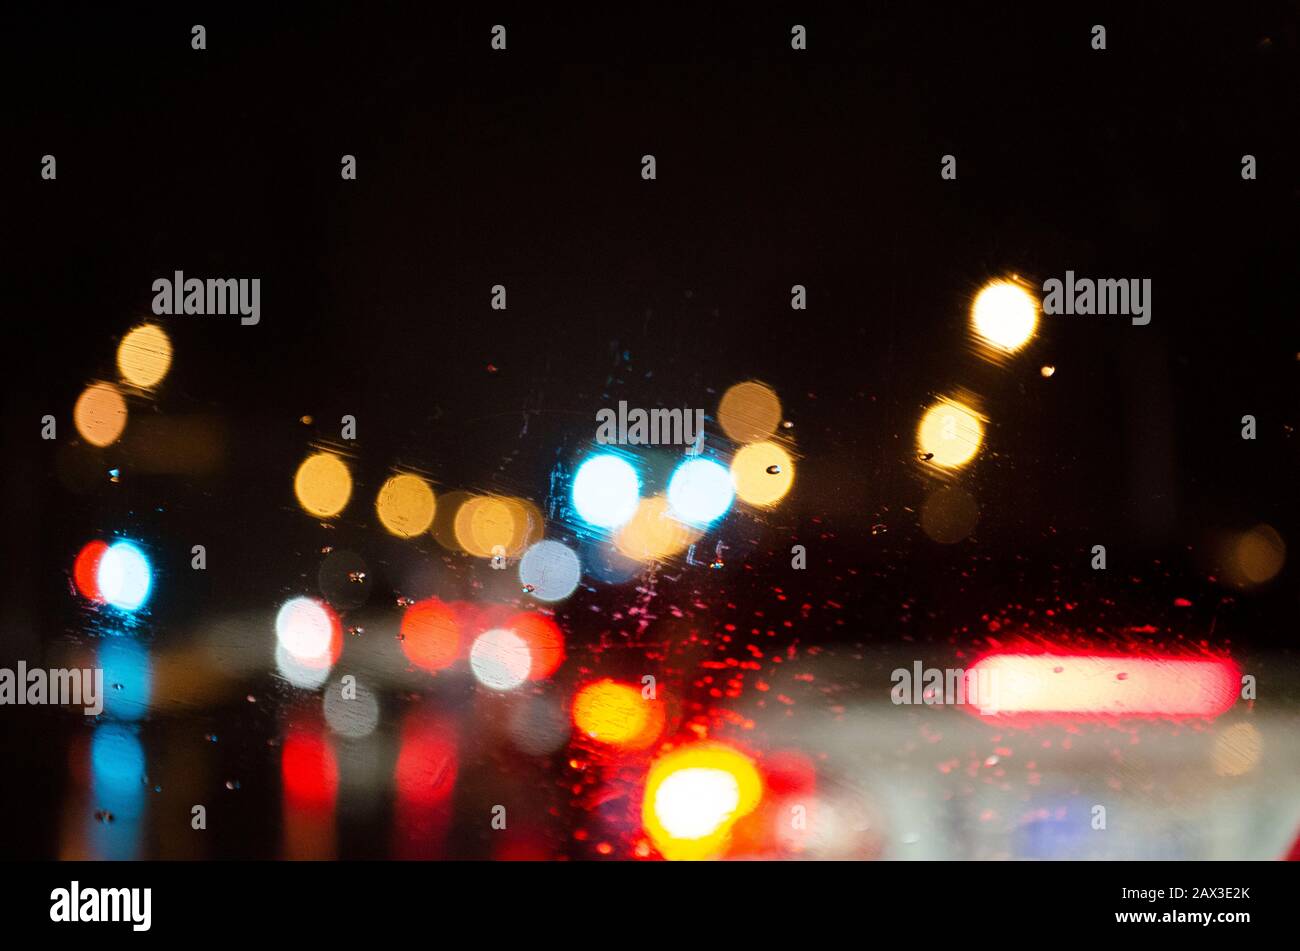 Defocused traffic car lights at night, bokeh style, abstract style background, city lights with dark background. Stock Photo